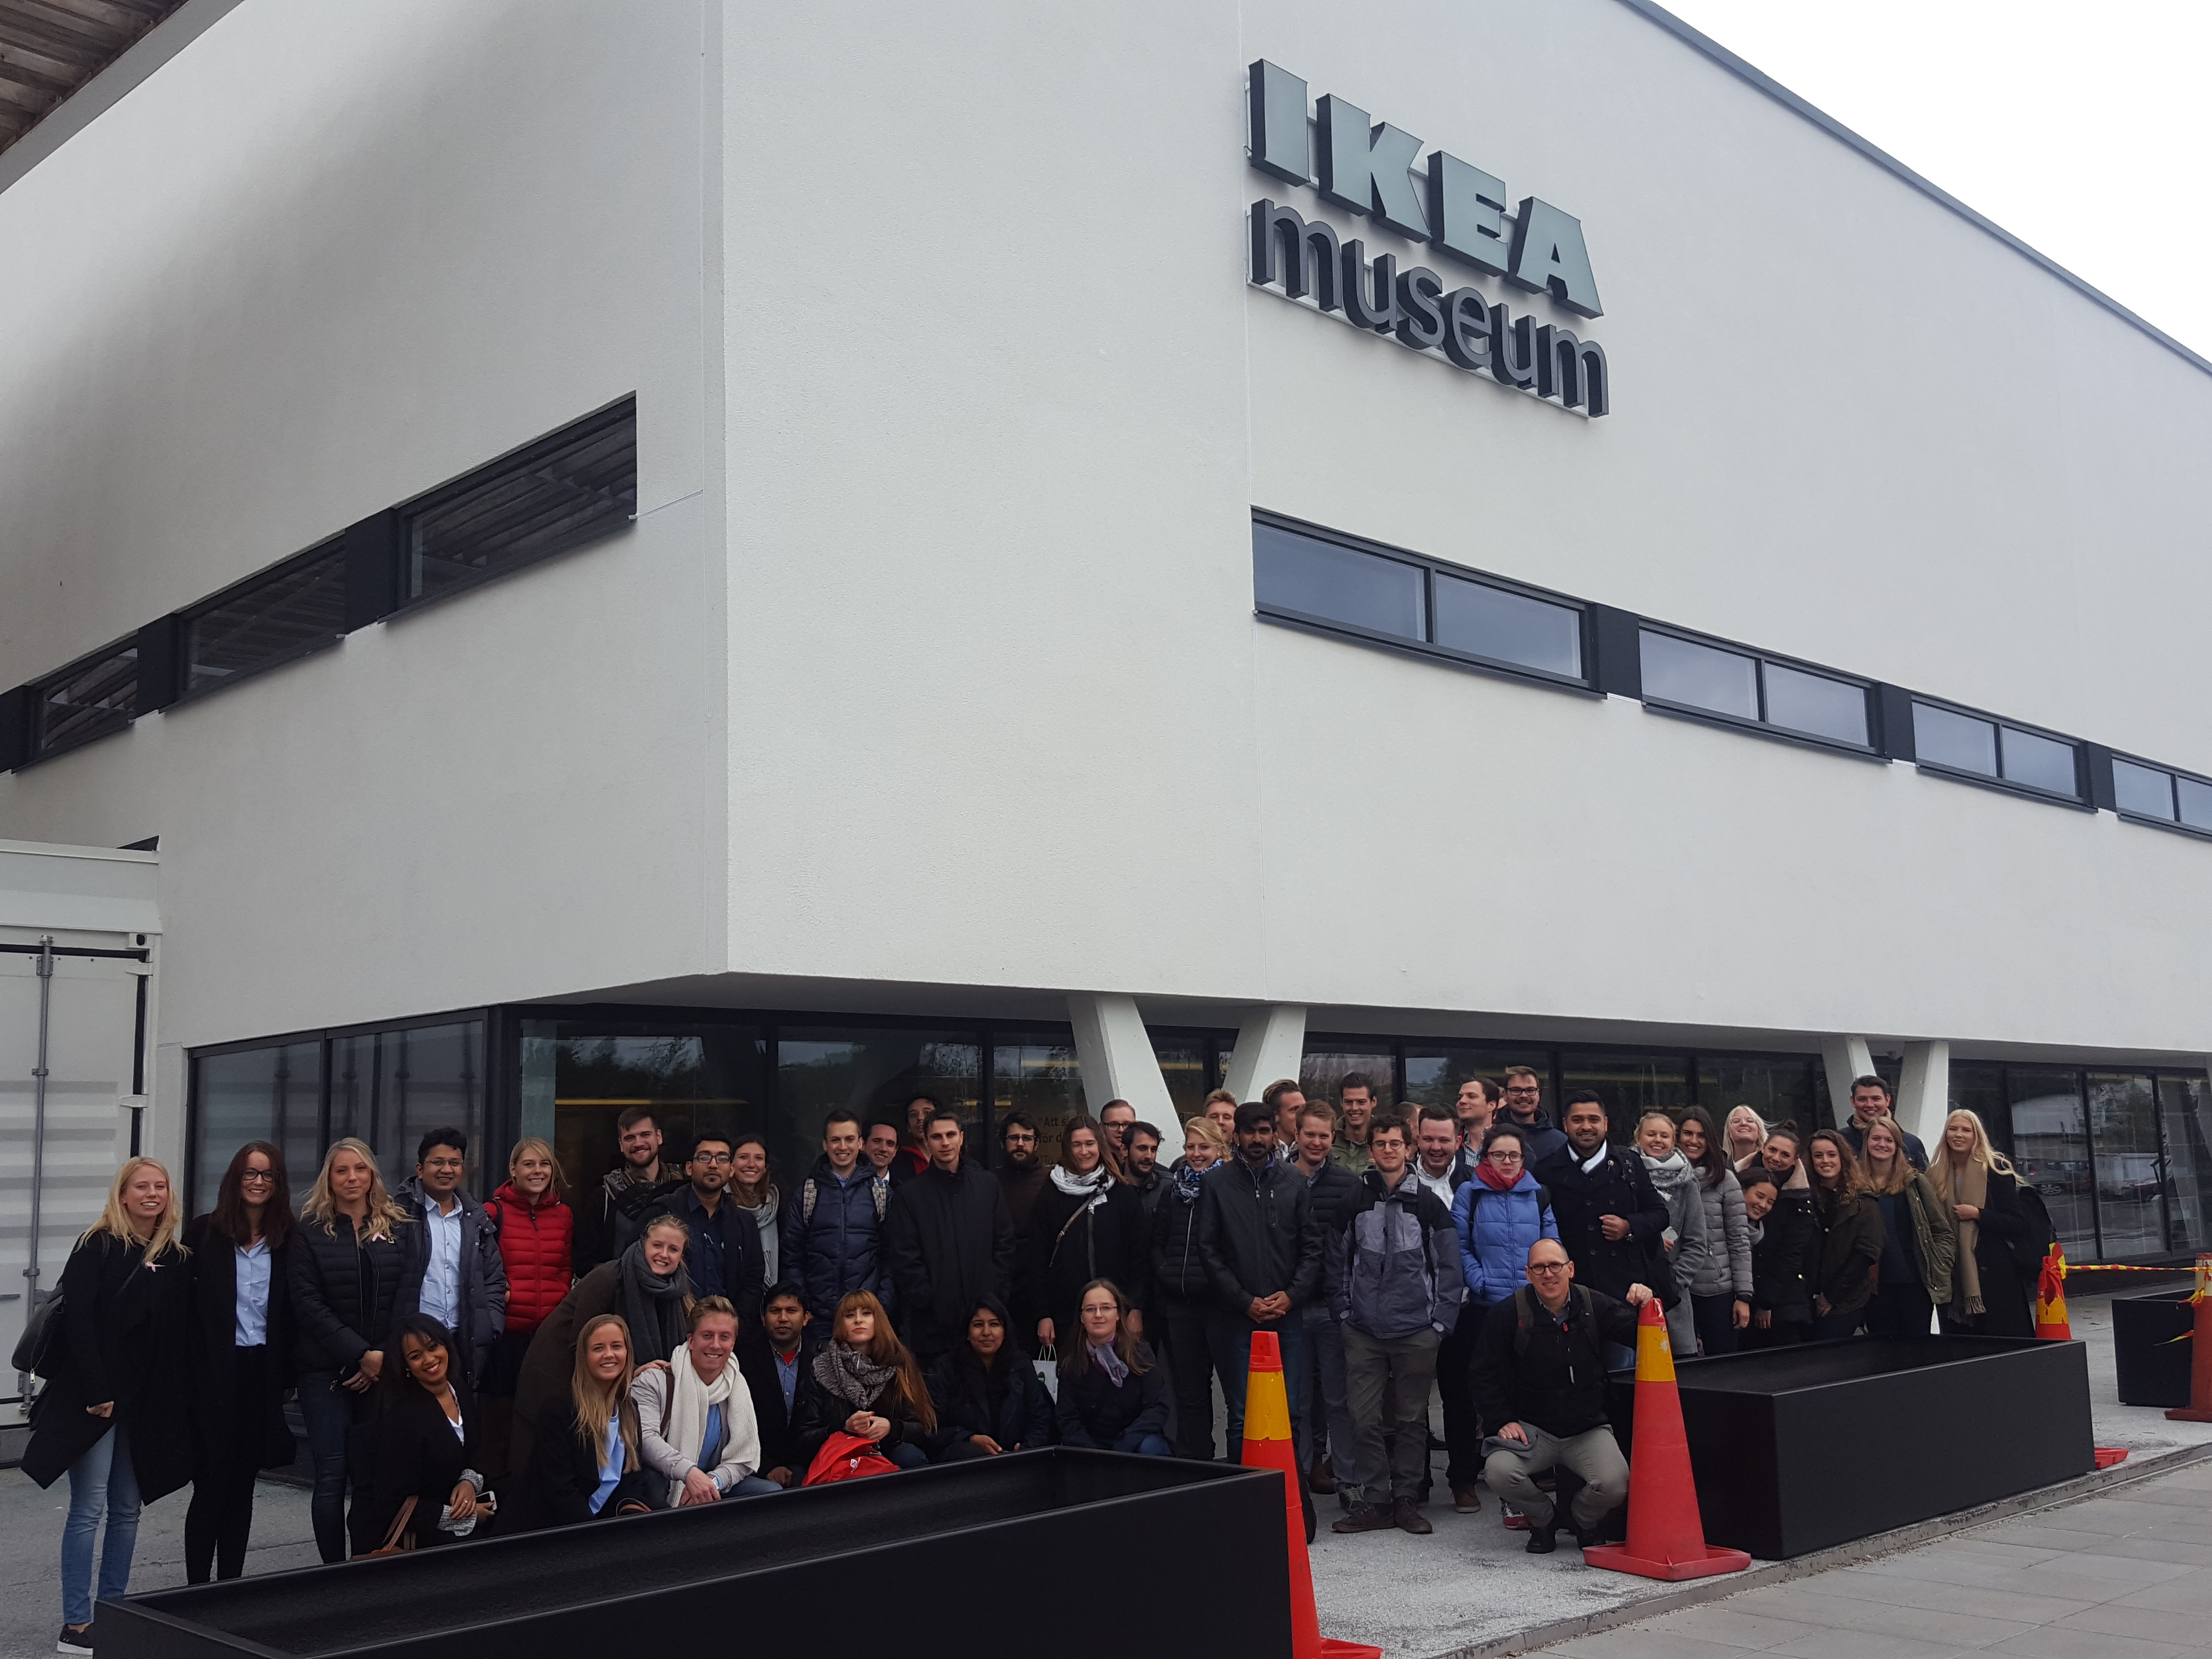 Group photo in front of the IKEA museum 